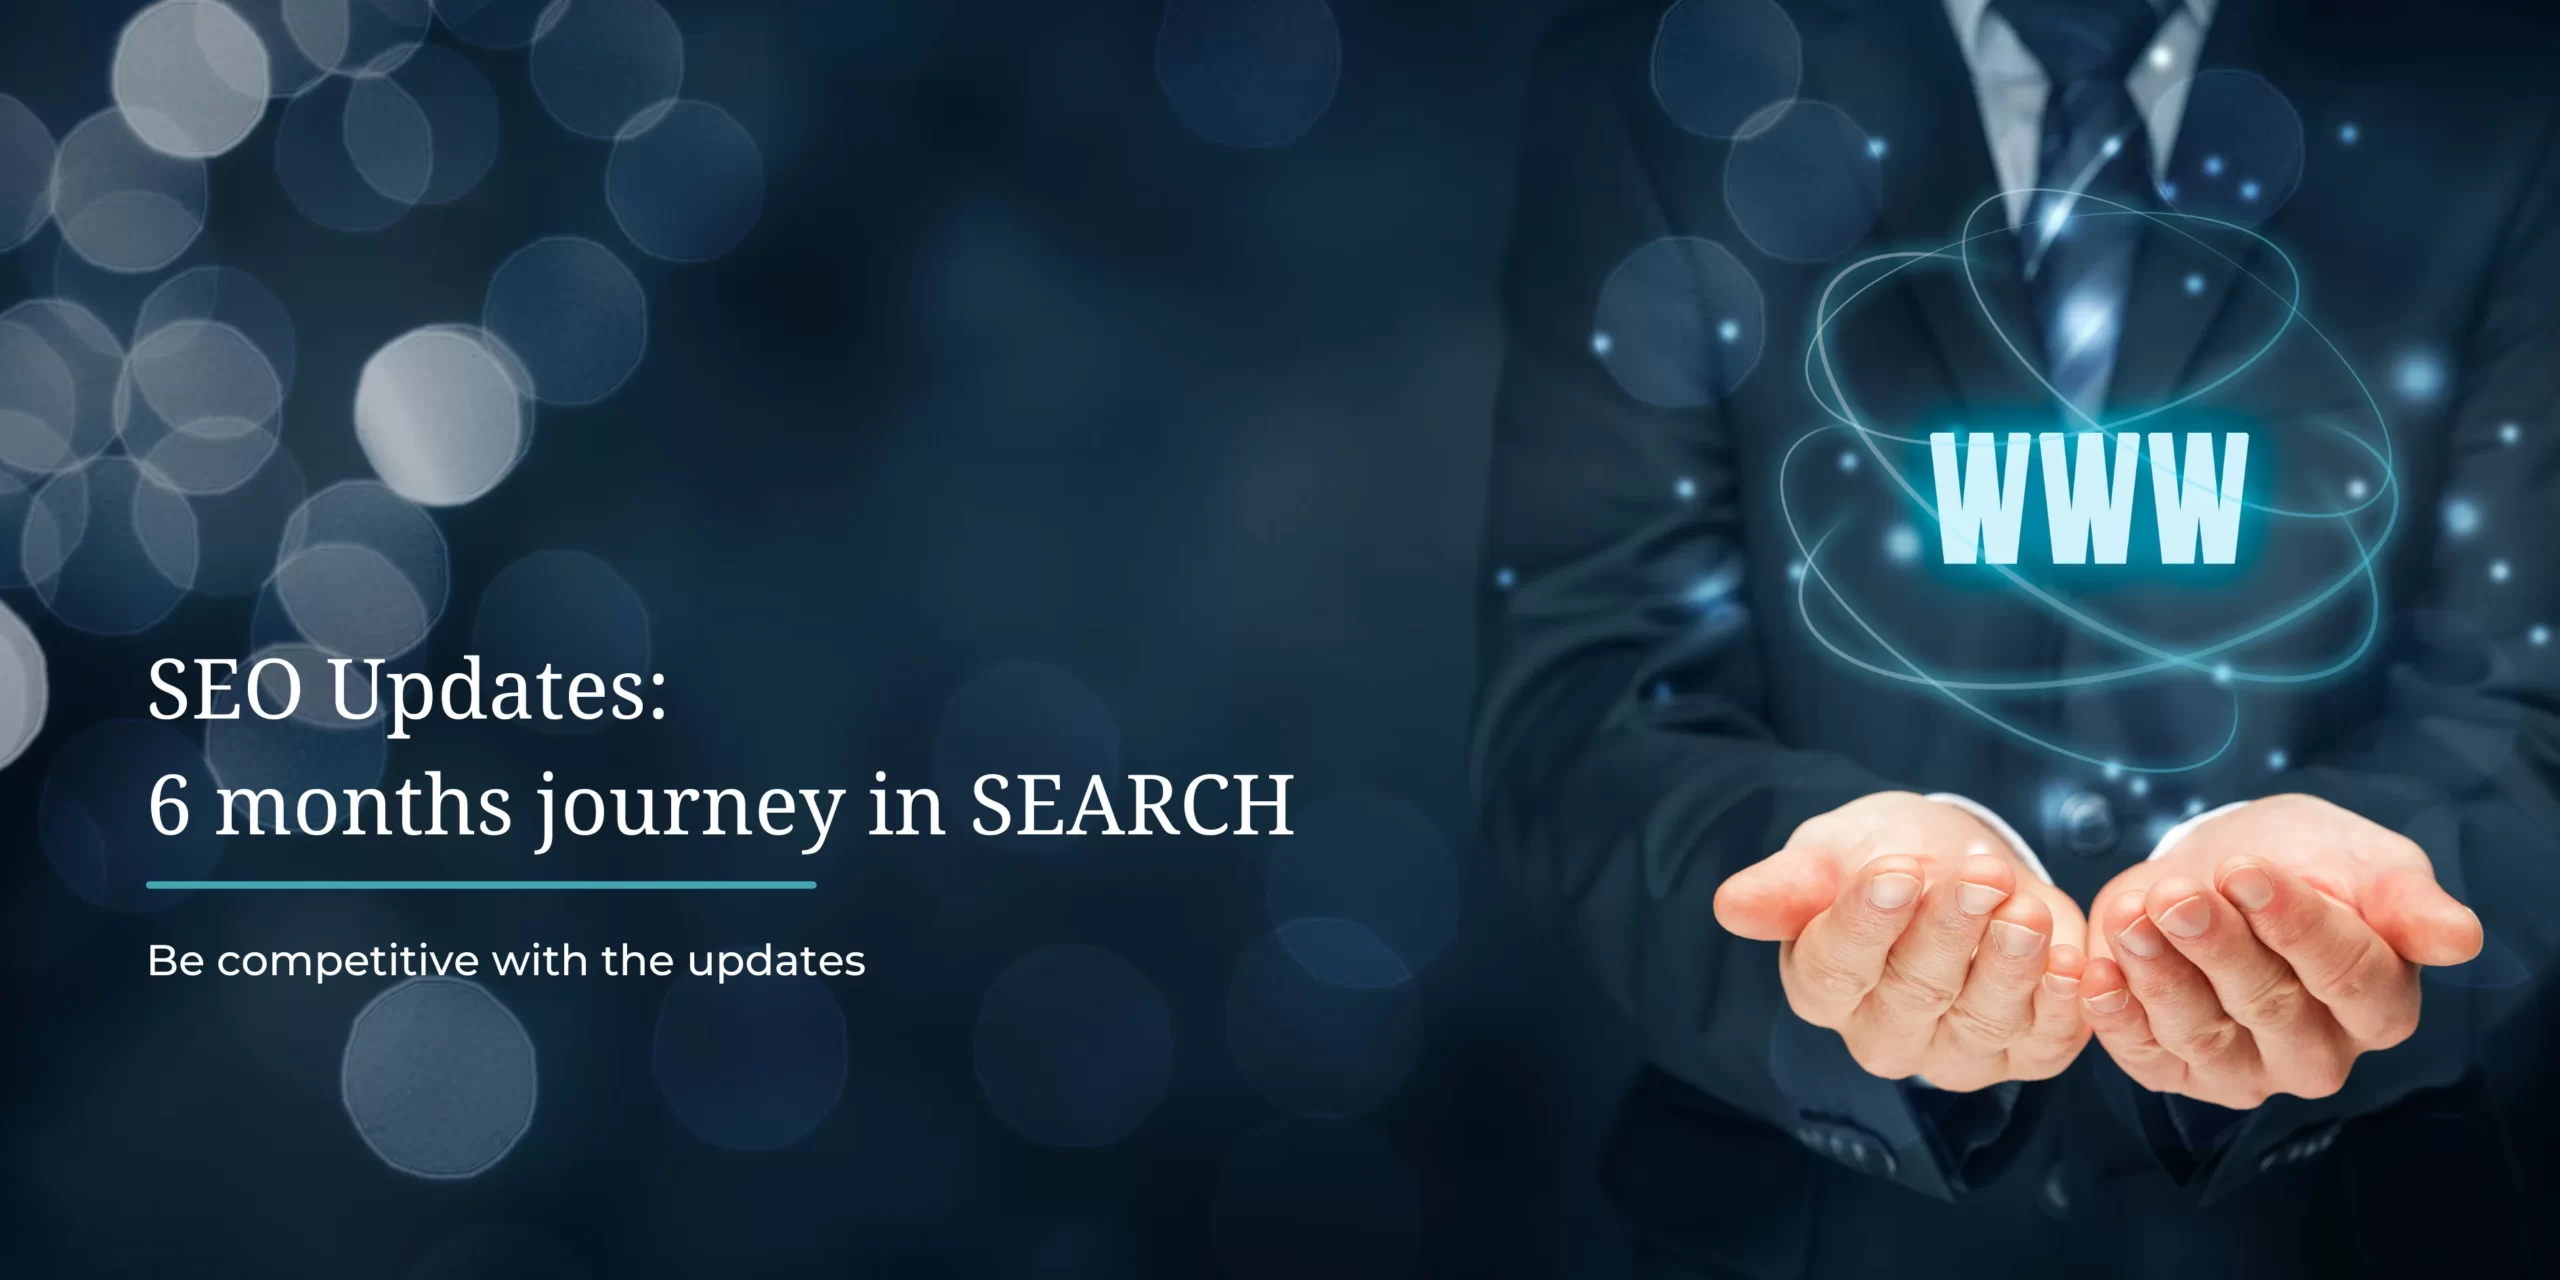 SEO Updates: 6 months journey in SEARCH